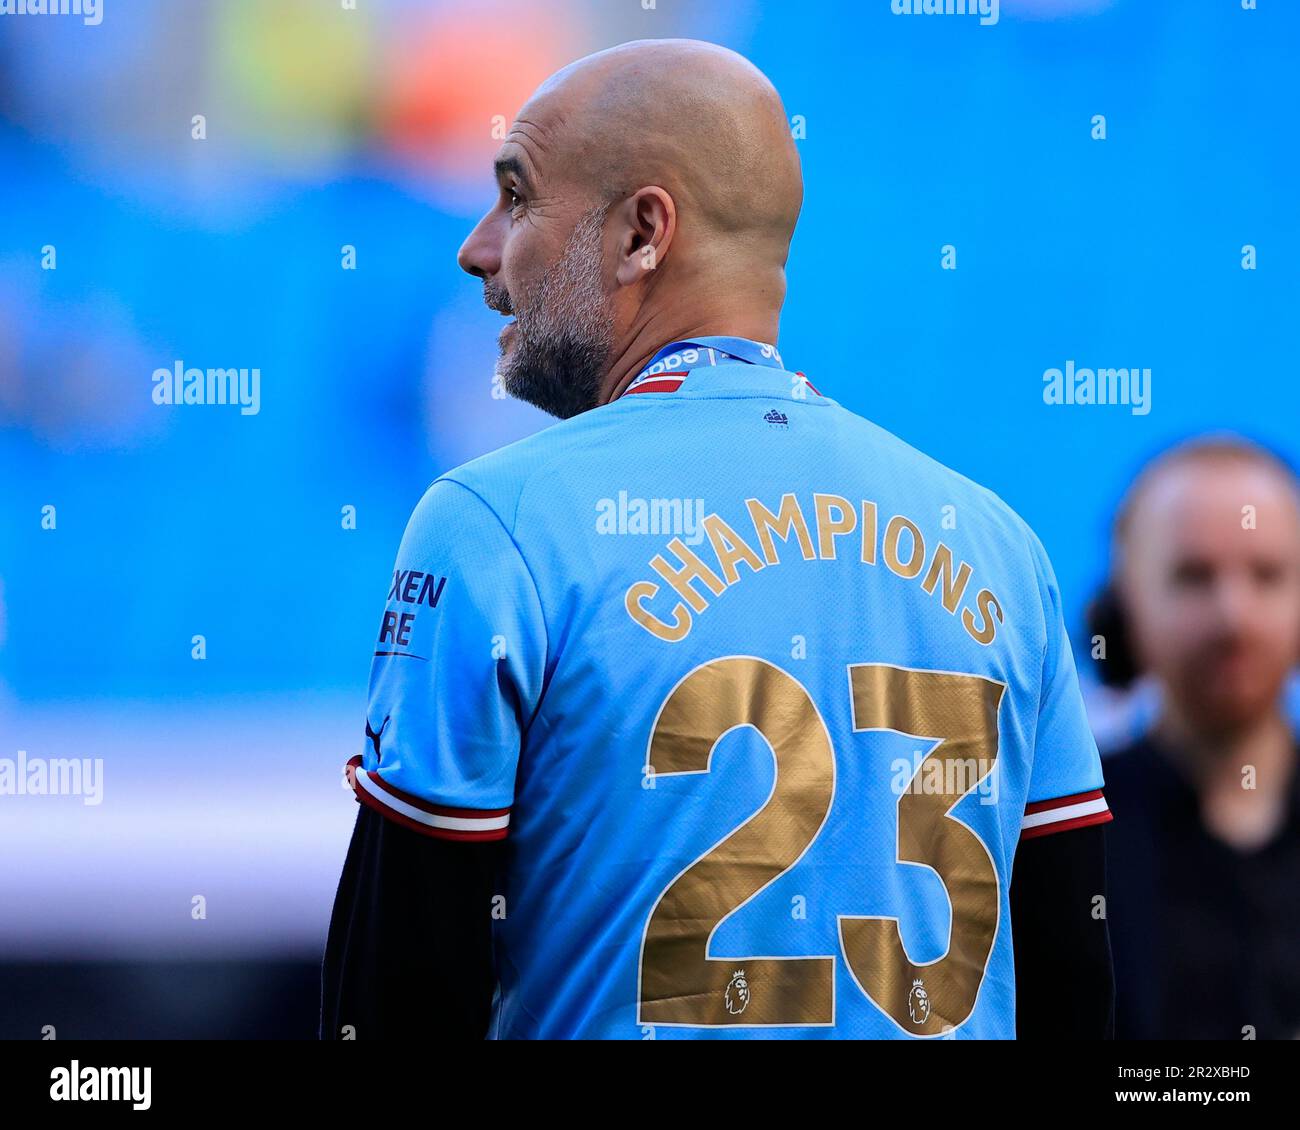 Pep Guardiola the Manchester City manager with his Champions 23 shirt after the Premier League match Manchester City vs Chelsea at Etihad Stadium, Manchester, United Kingdom, 21st May 2023 (Photo by Conor